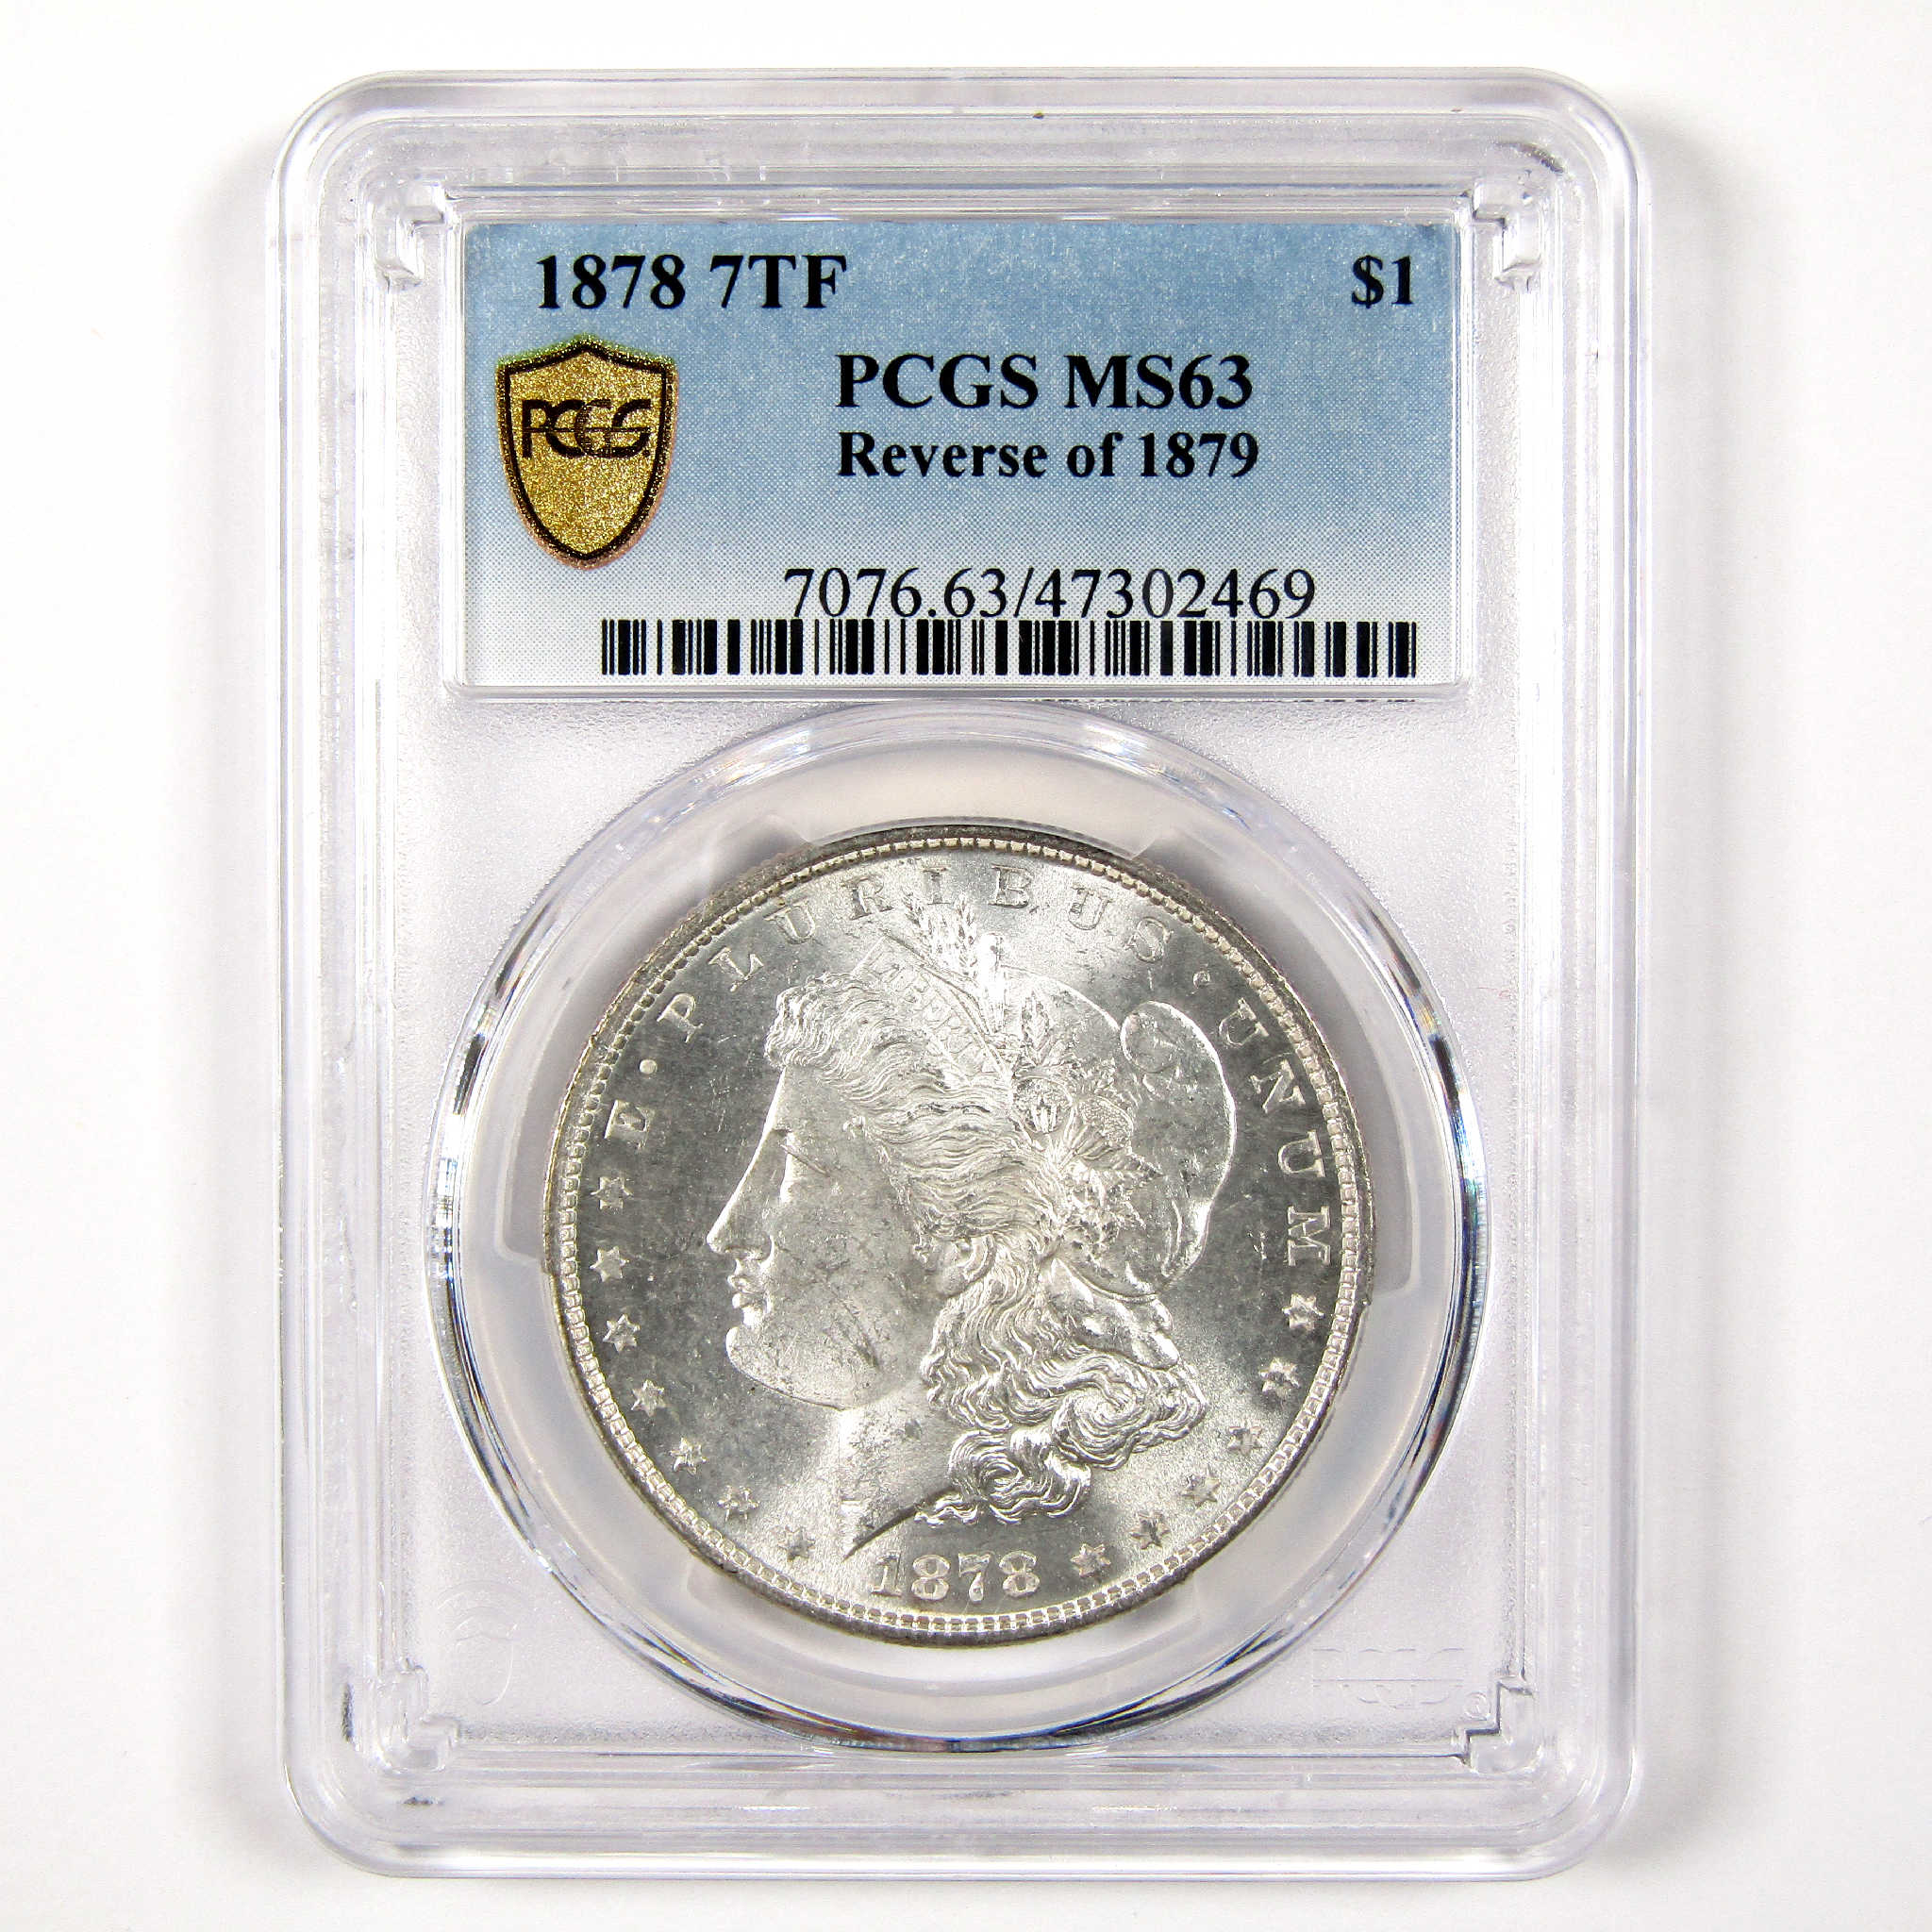 1878 7TF Rev 79 Morgan Dollar MS 63 PCGS Silver $1 Unc SKU:I11314 - Morgan coin - Morgan silver dollar - Morgan silver dollar for sale - Profile Coins &amp; Collectibles